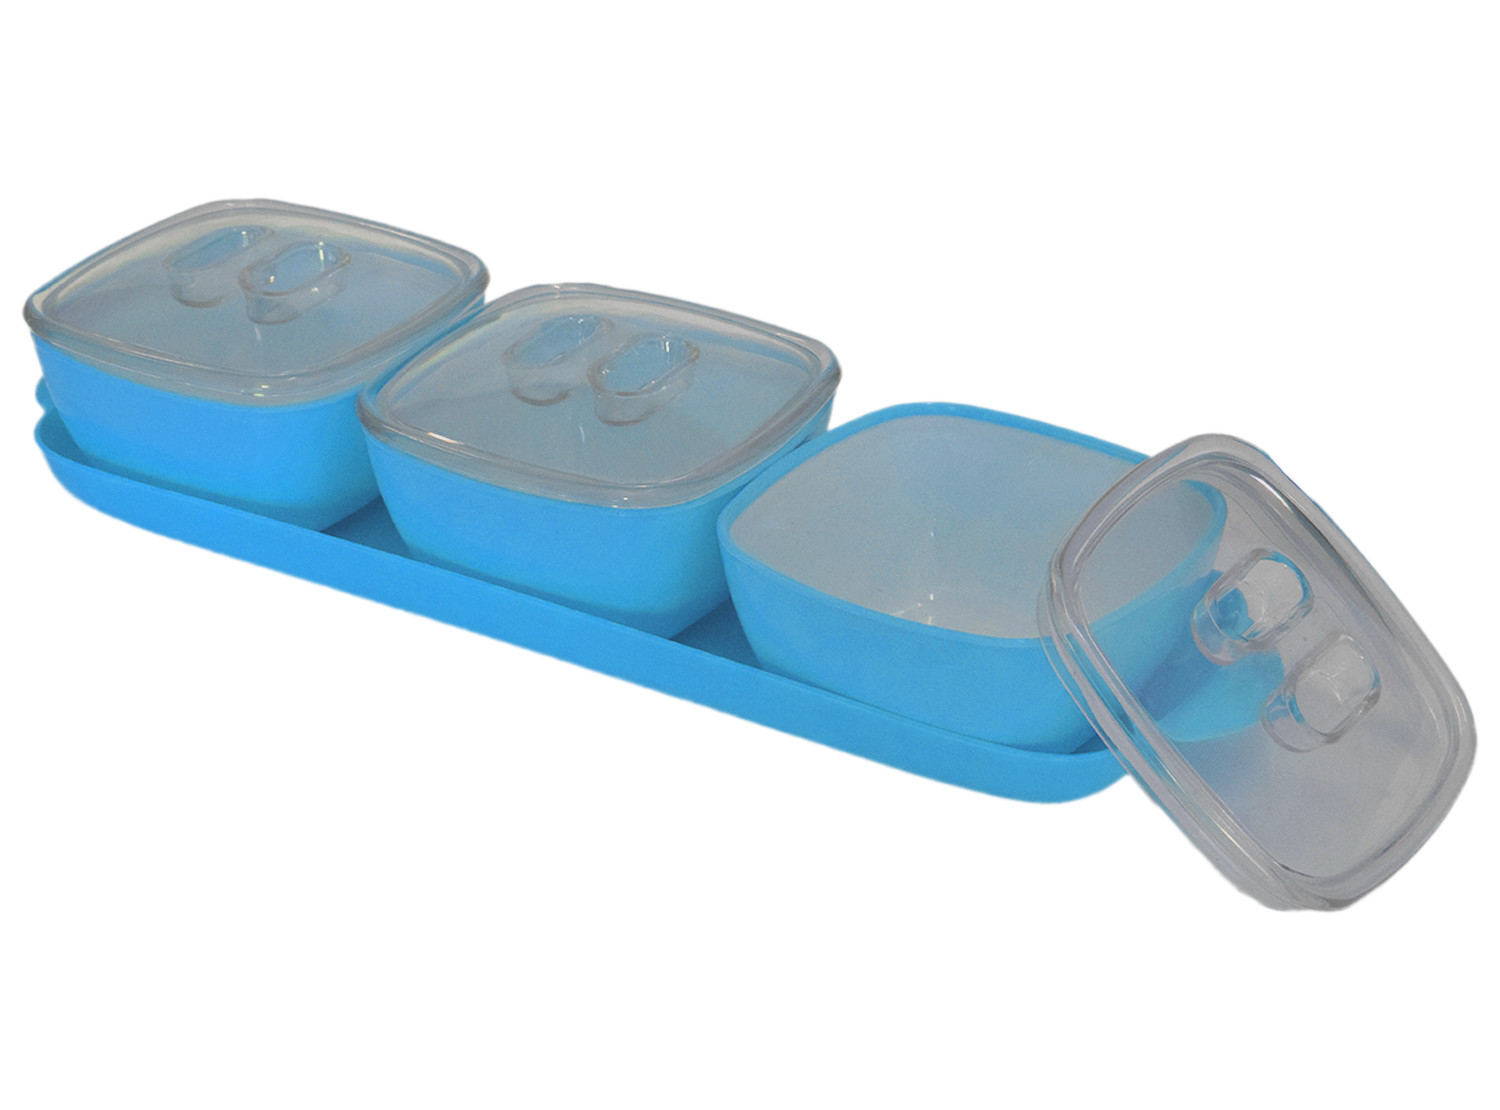 Kuber Industries Plastic 3 Bowls & 1 Tray Set For Serving & Store Dry Fruits, candies, Snacks With Silicon Rubberized Ring Lid (Blue)